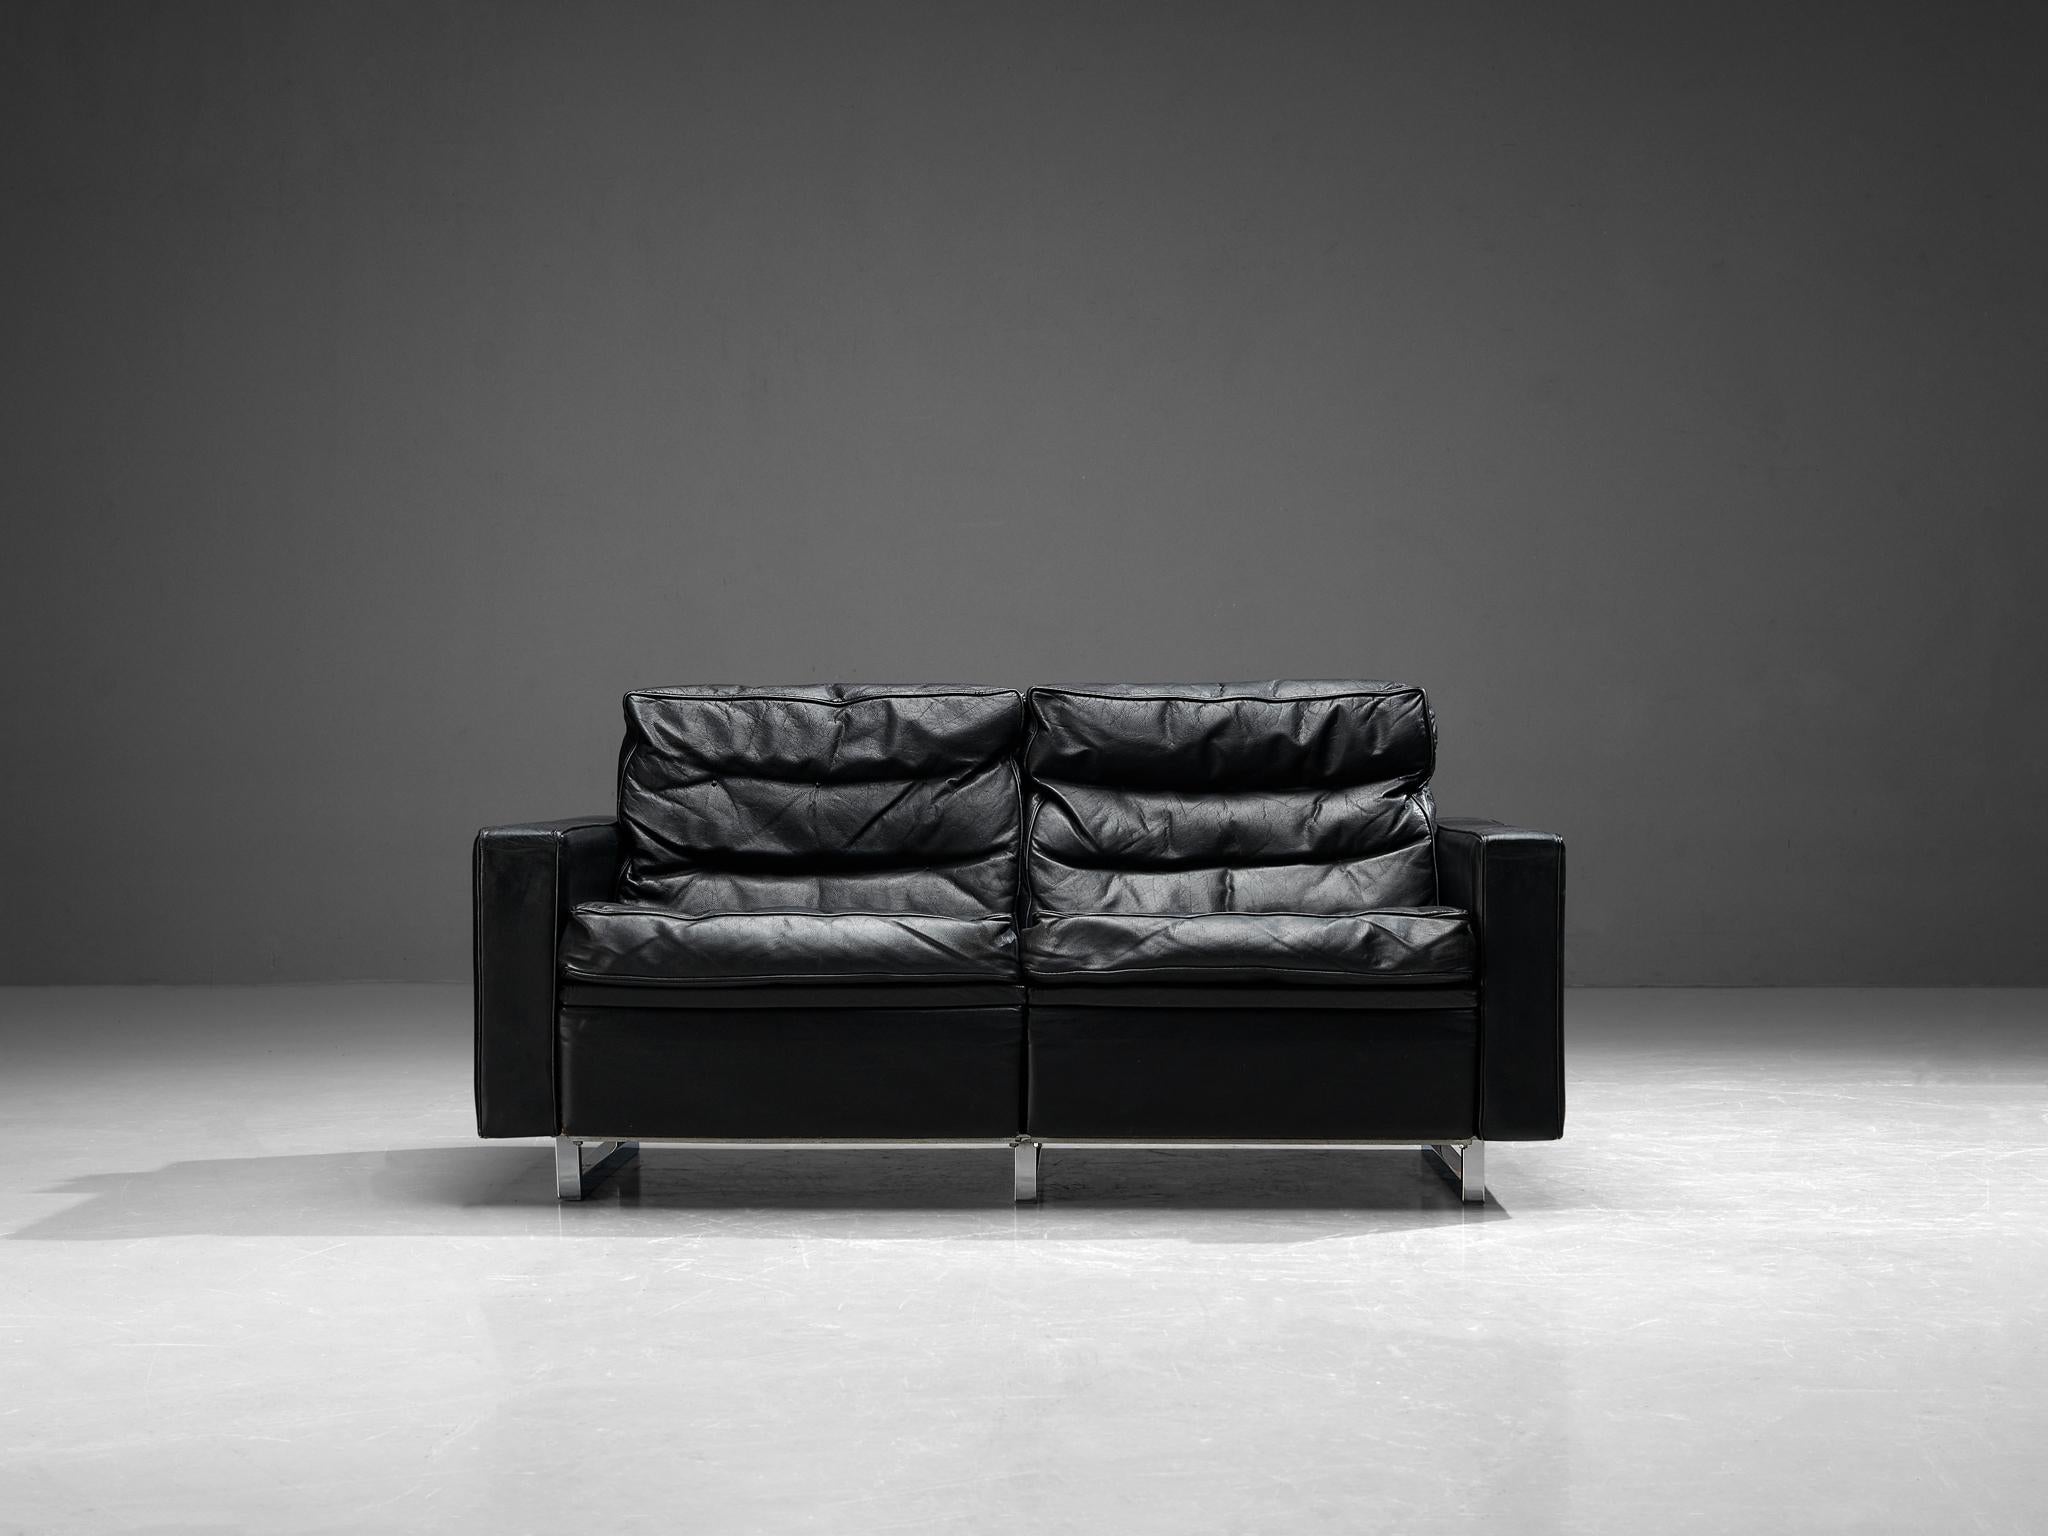 Sofa, leather, Europe, 1960s.

This two-seat sofa is simplistic, yet stylish in its design. Due to the overall black color of the leatherette, the sofa radiates smoothness and underlines the streamlined design. Therefore, it enhances the straight,